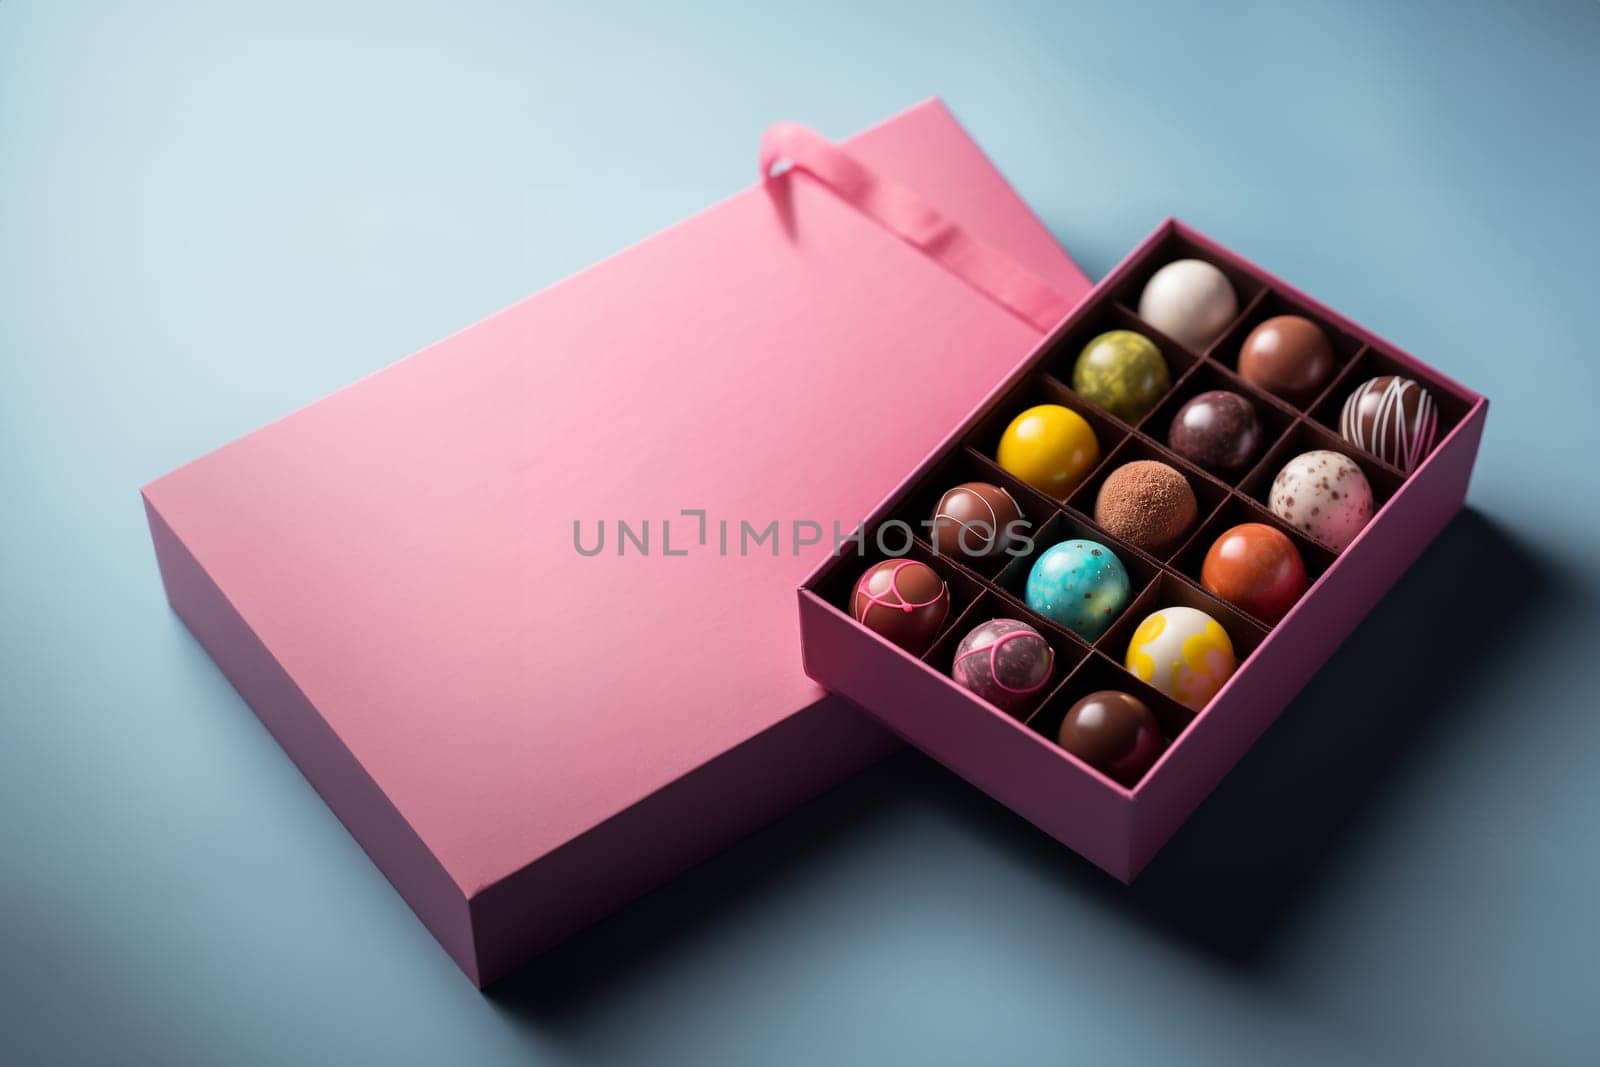 Open gift box with assortment of homemade chocolate bonbons. Modern hand painted chocolate candy. Product concept for chocolatier. AI generation